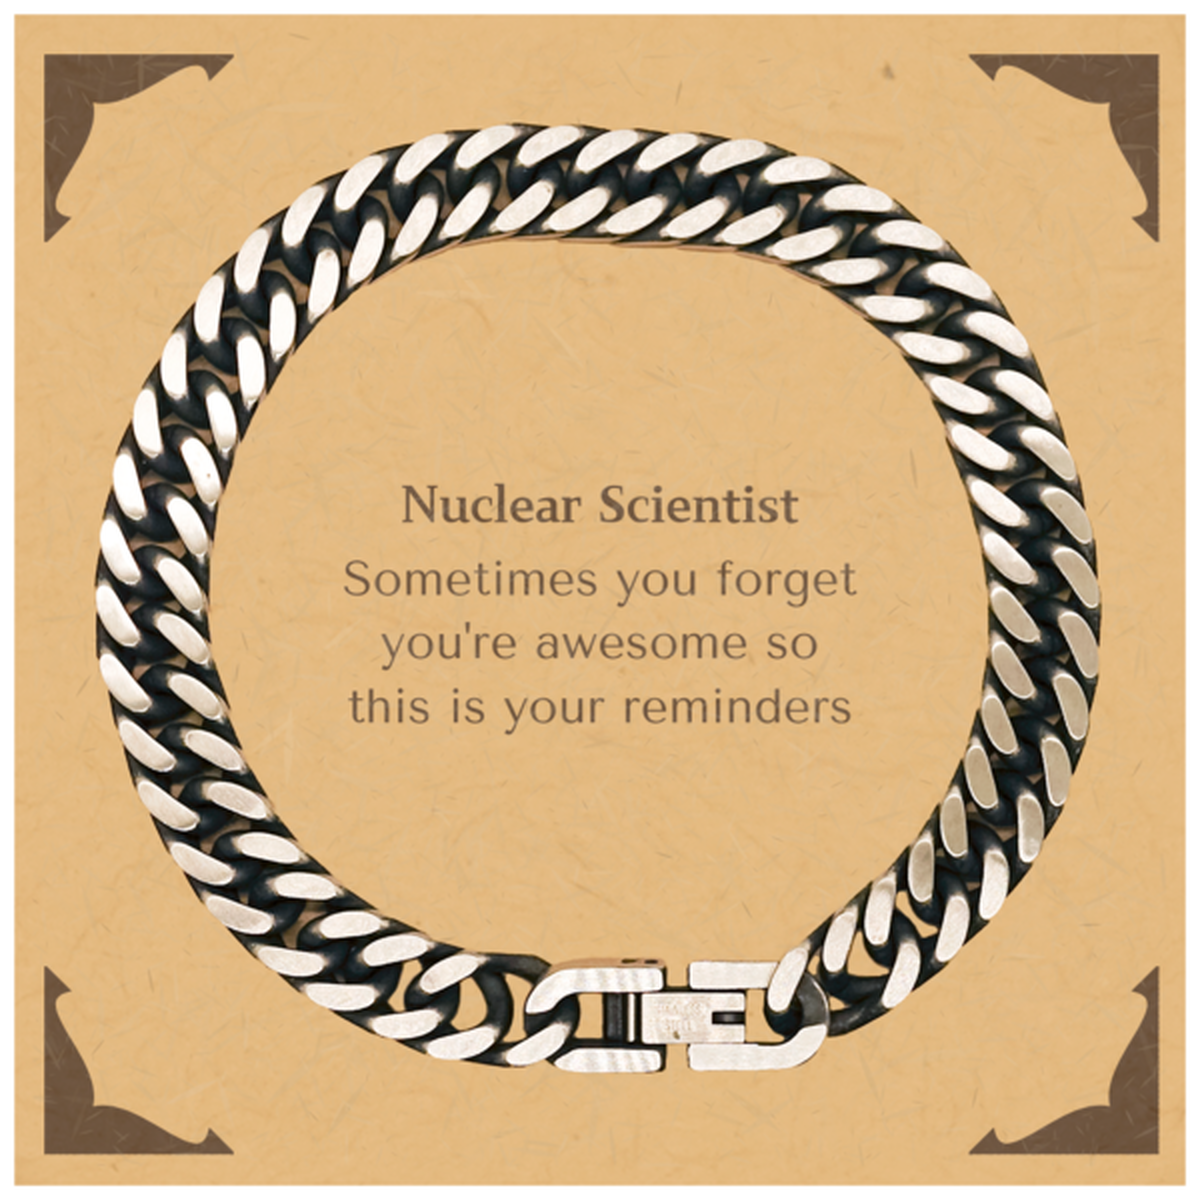 Sentimental Nuclear Scientist Cuban Link Chain Bracelet, Nuclear Scientist Sometimes you forget you're awesome so this is your reminders, Graduation Christmas Birthday Gifts for Nuclear Scientist, Men, Women, Coworkers